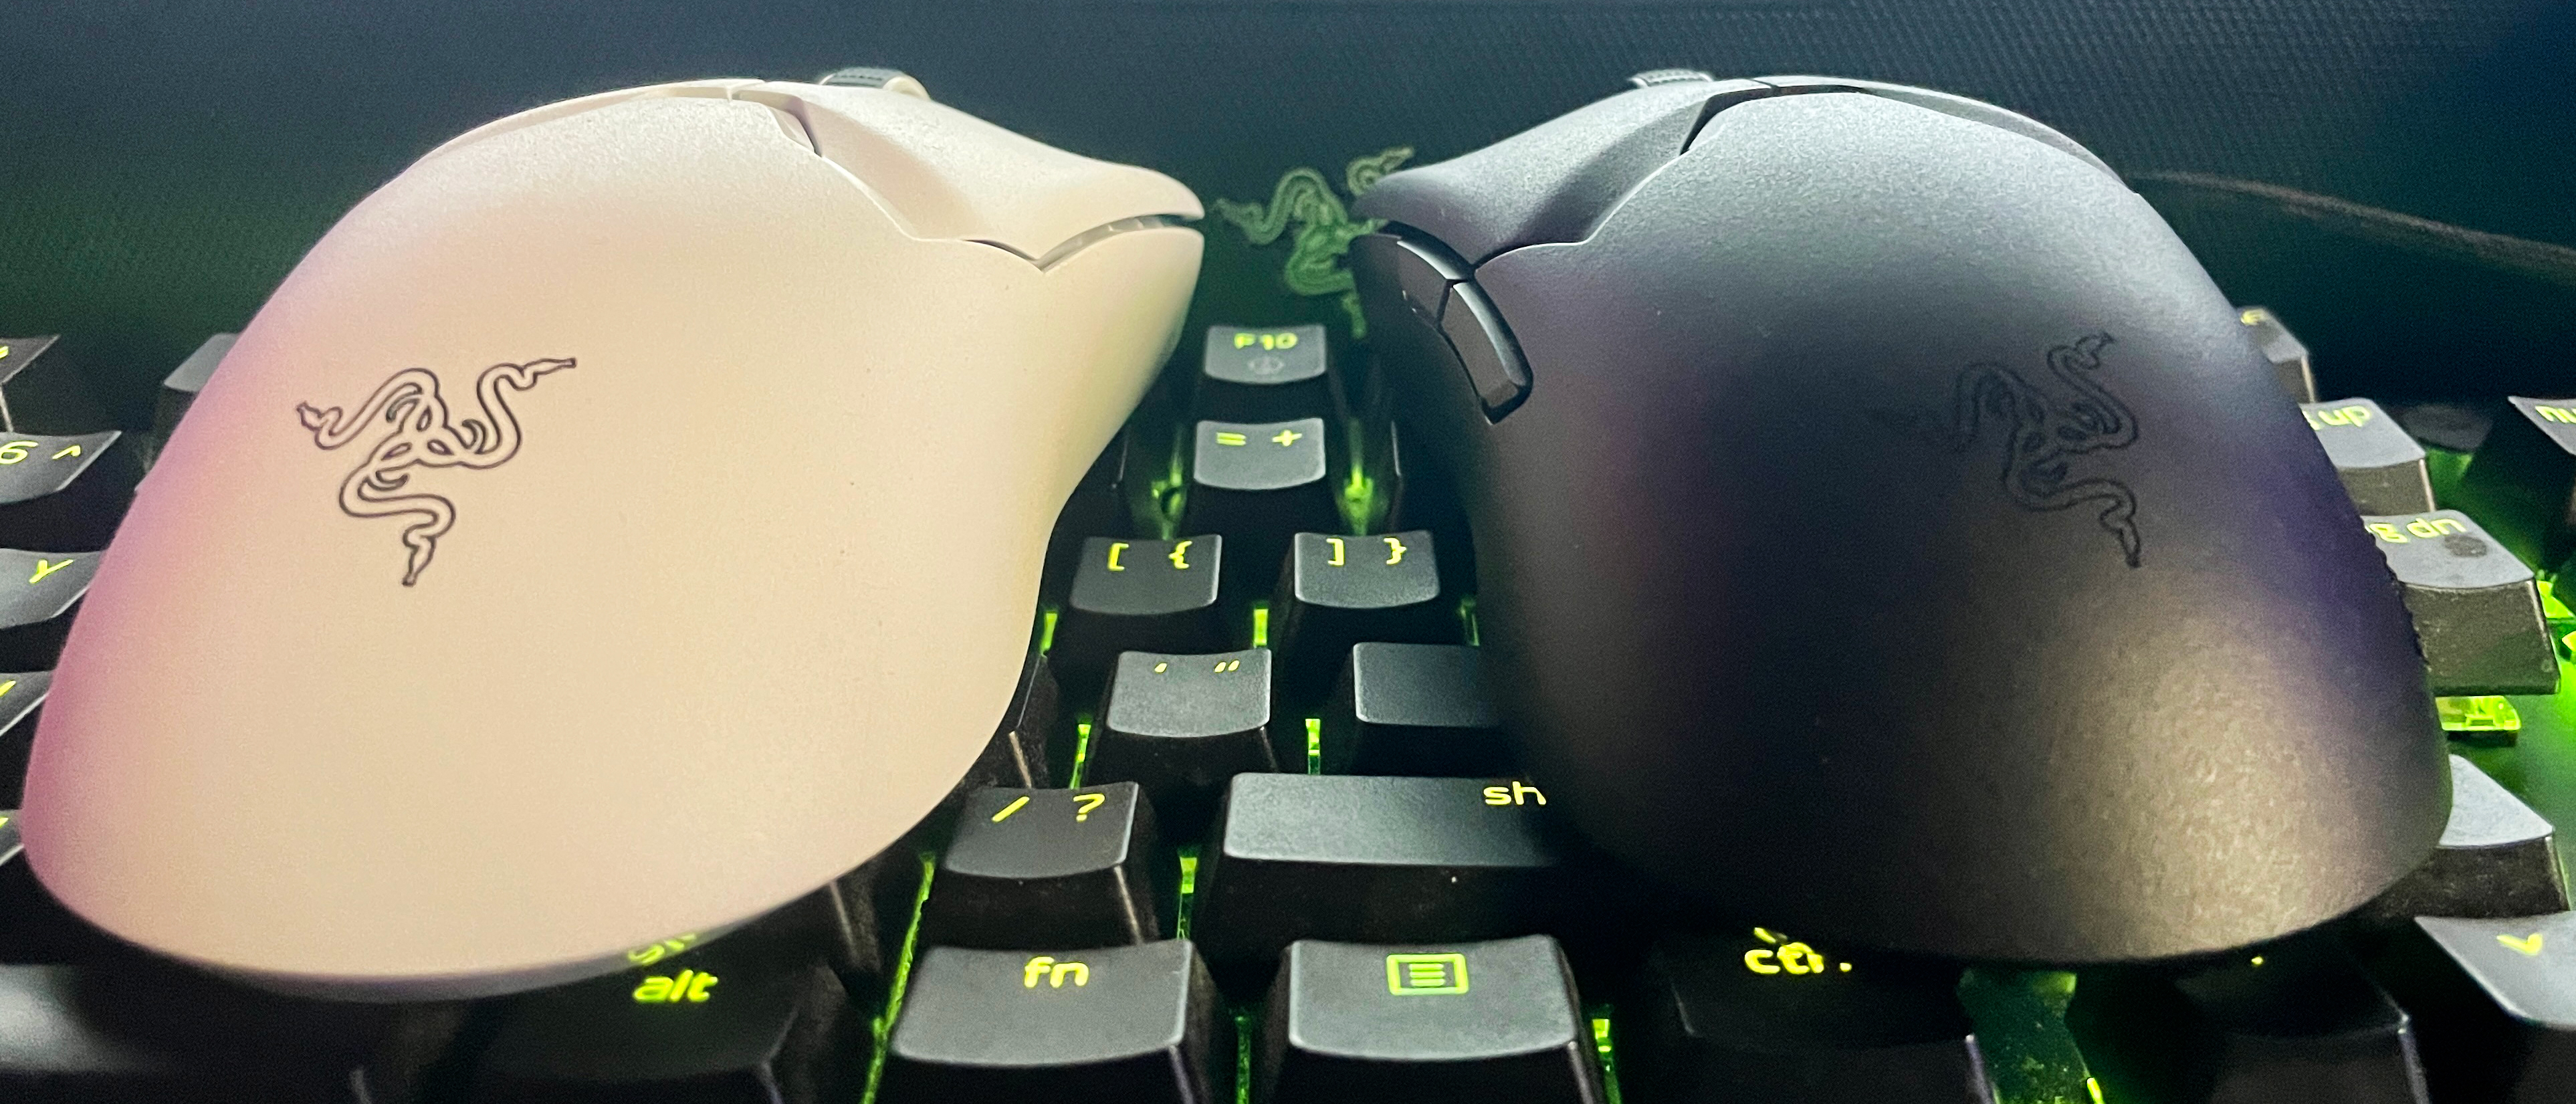 Razer Viper V2 Pro review: Laser-focused on speed and precision